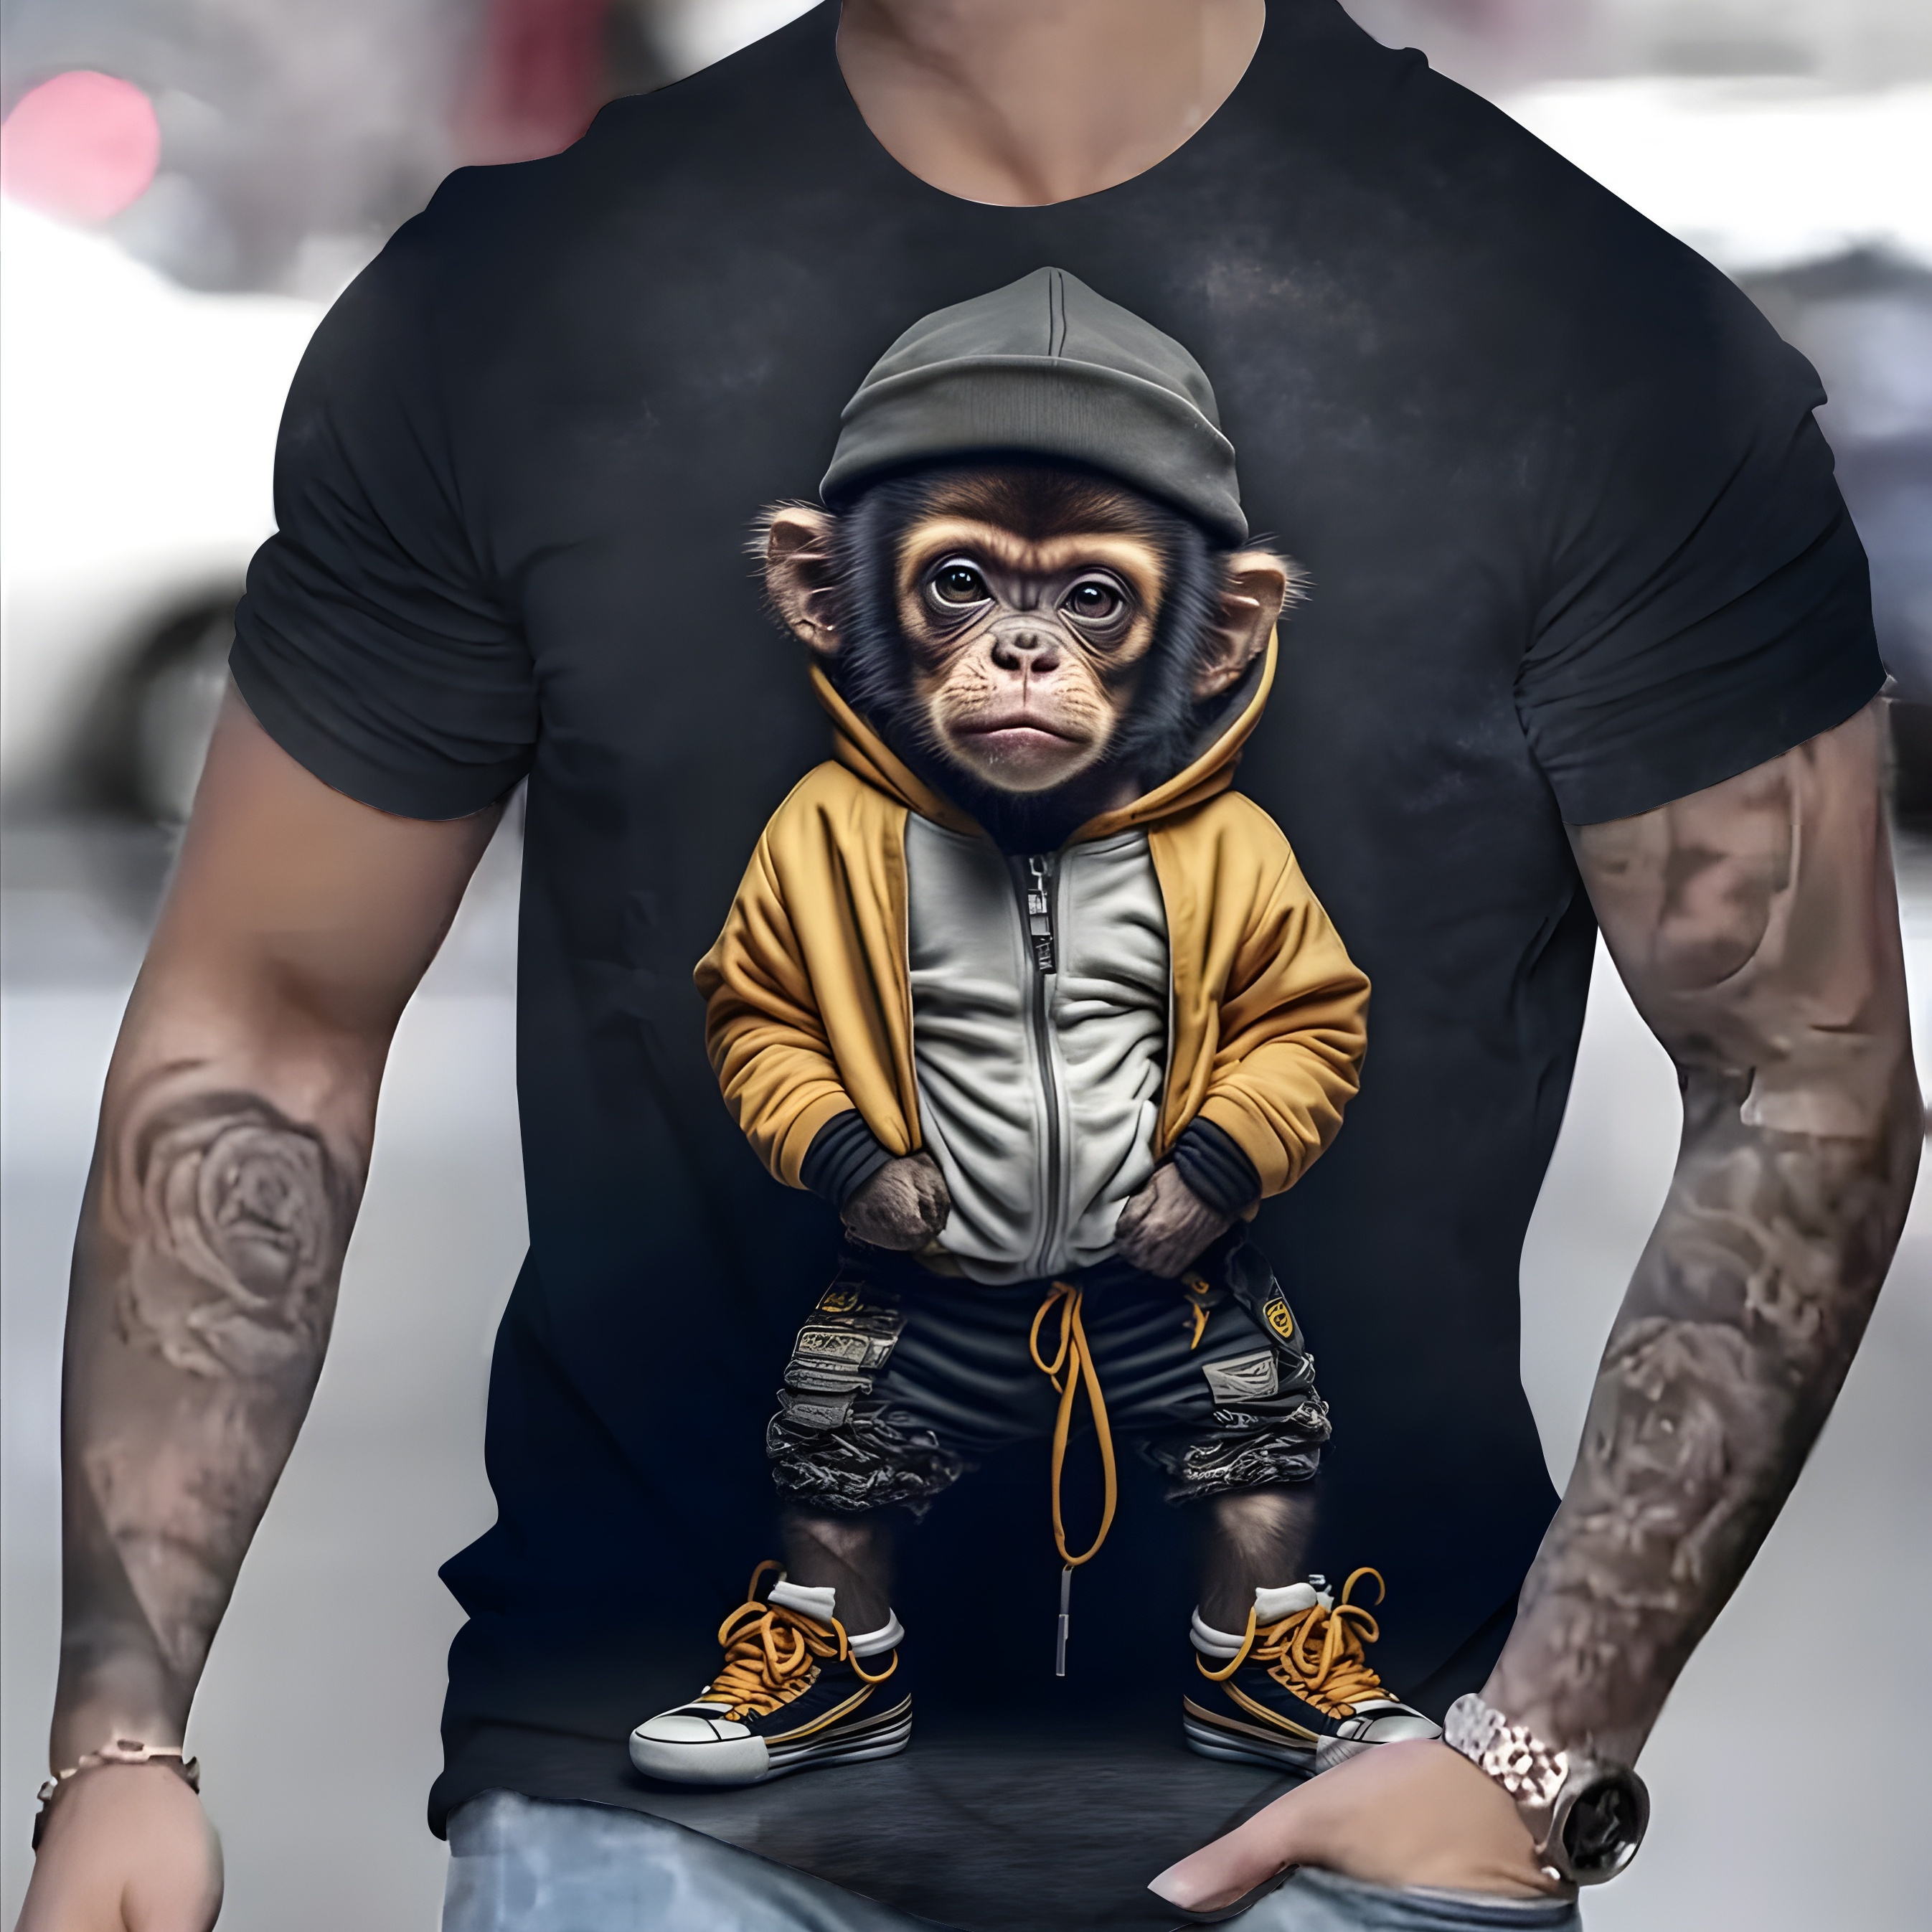 

Cartoon Monkey Graphic Print Crew Neck Short Sleeve T-shirt For Men, Casual Summer T-shirt For Daily Wear And Vacation Resorts